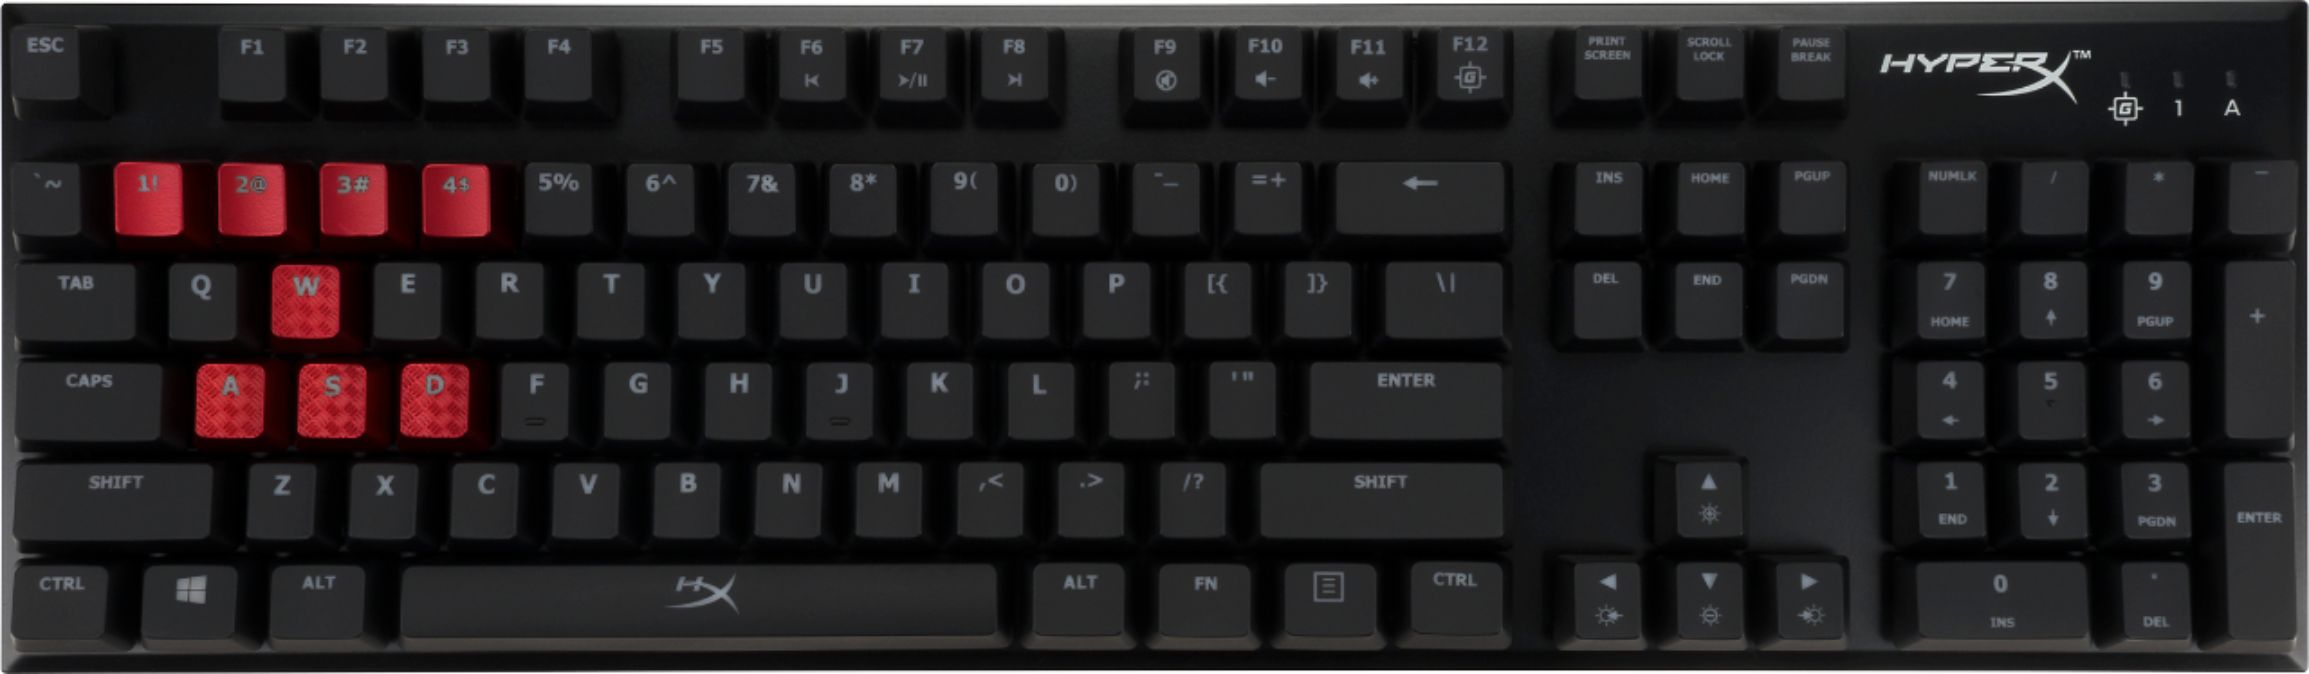 Collective Dusty limbs Best Buy: HyperX Alloy FPS Wired Gaming Mechanical Cherry MX Blue Switch  Keyboard with Backlighting Black/Red HX-KB1BL1-NA/A1